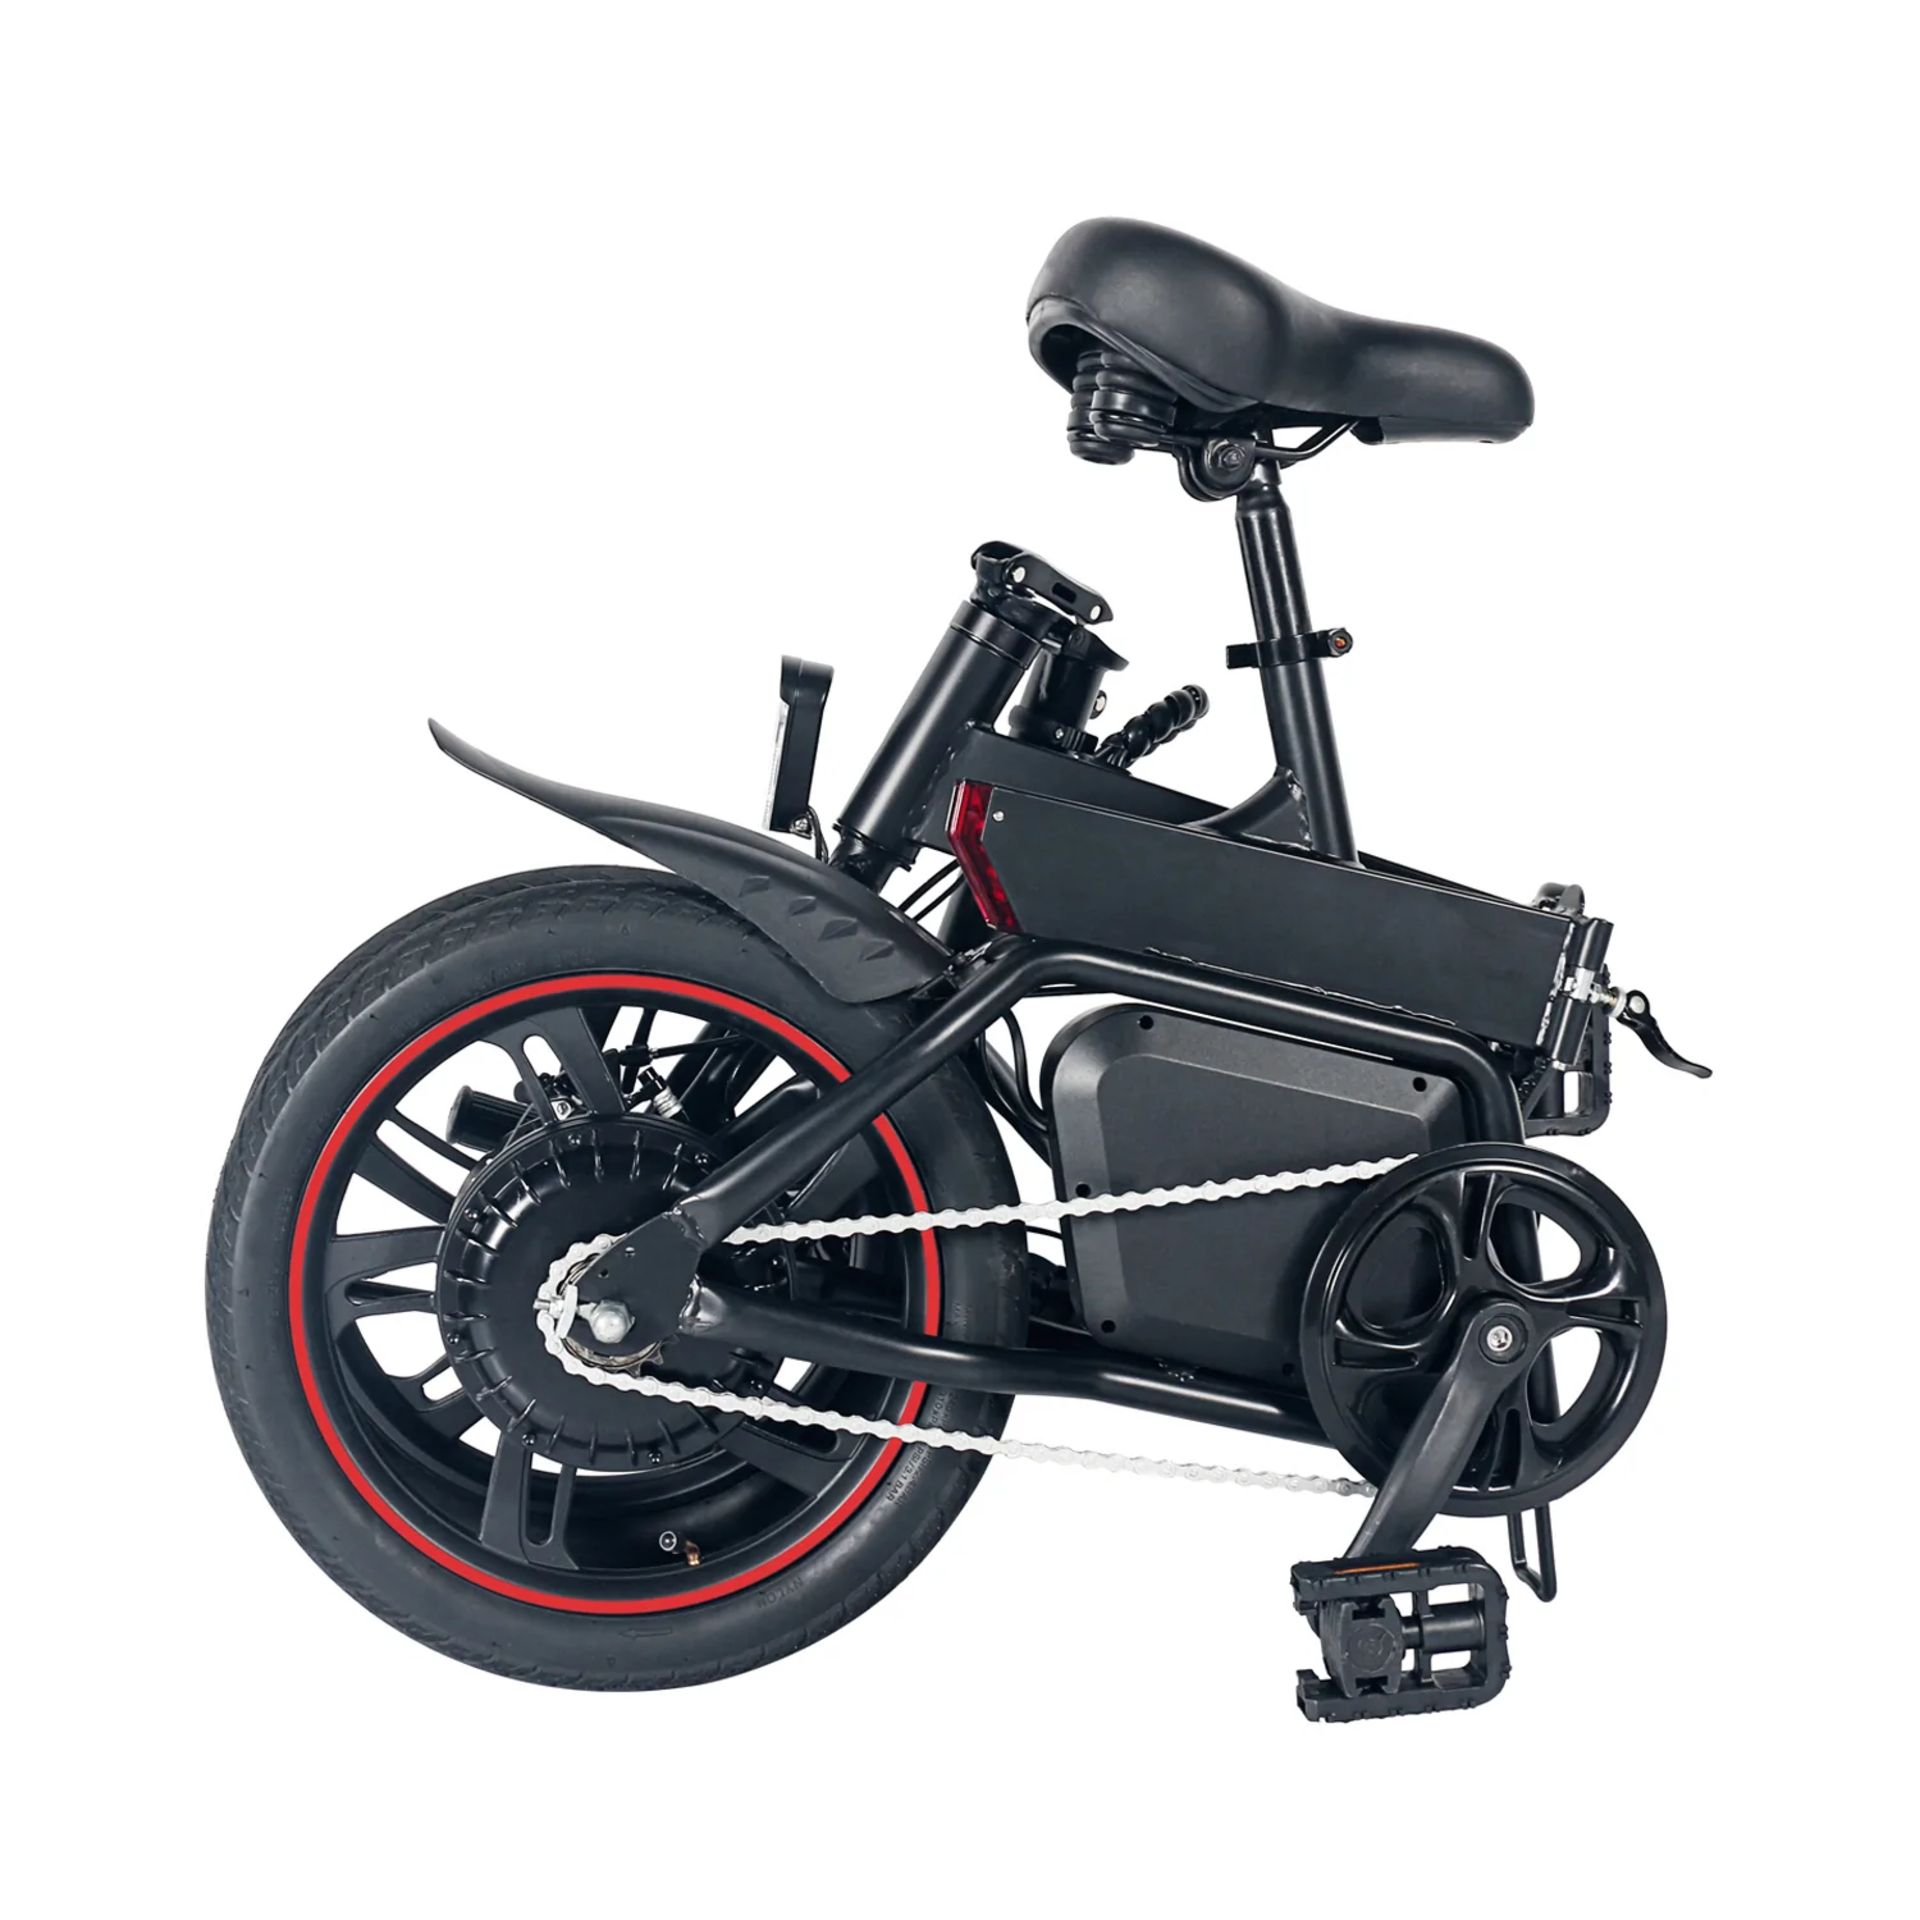 Windgoo B20 Pro Electric Bike. RRP £1,100.99. With 16-inch-wide tires and a frame of upgraded - Image 5 of 7